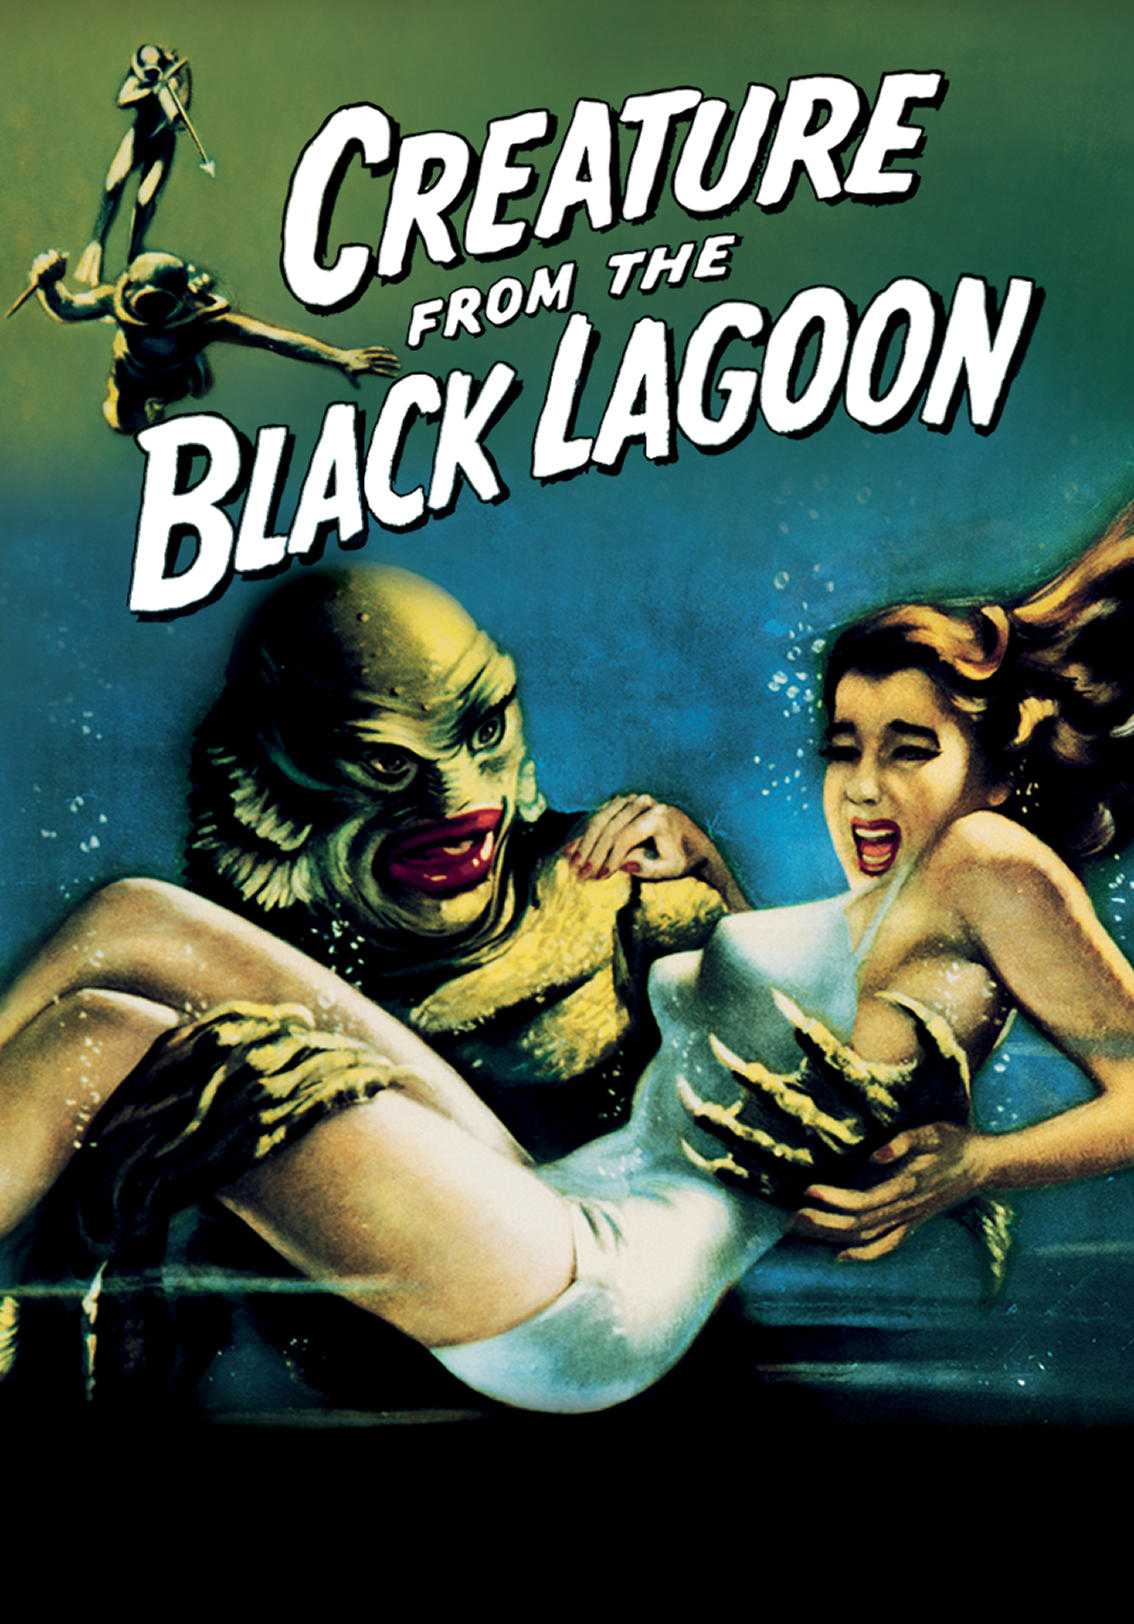 Creature from the Black Lagoon (1954) | Kaleidescape Movie Store